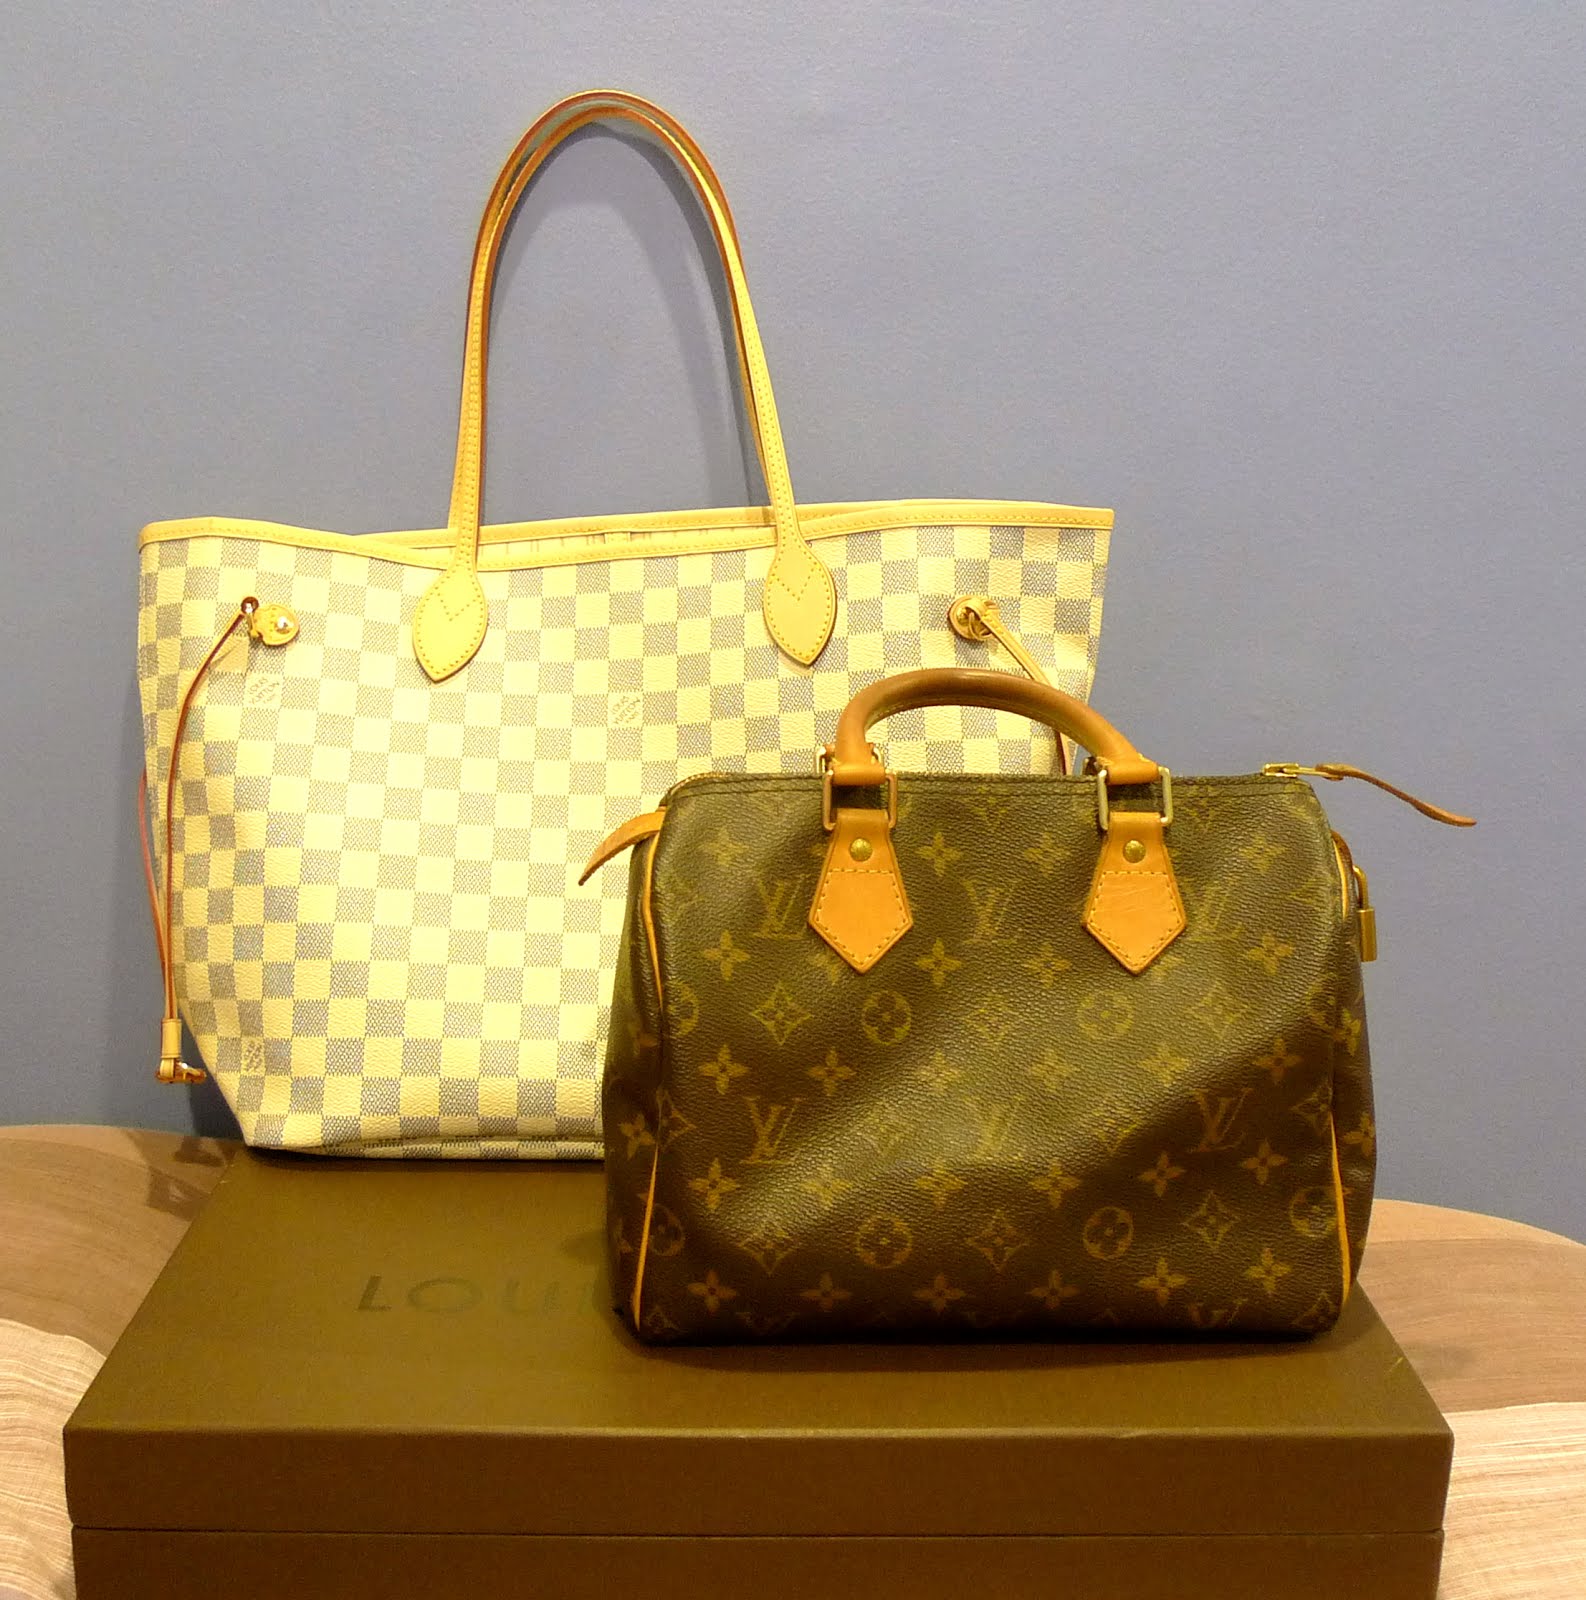 LV Damier Azur Noe- in a darker patina (picts from TPF)  Louis vuitton  handbags neverfull, Louis vuitton handbags outlet, Louis vuitton bag